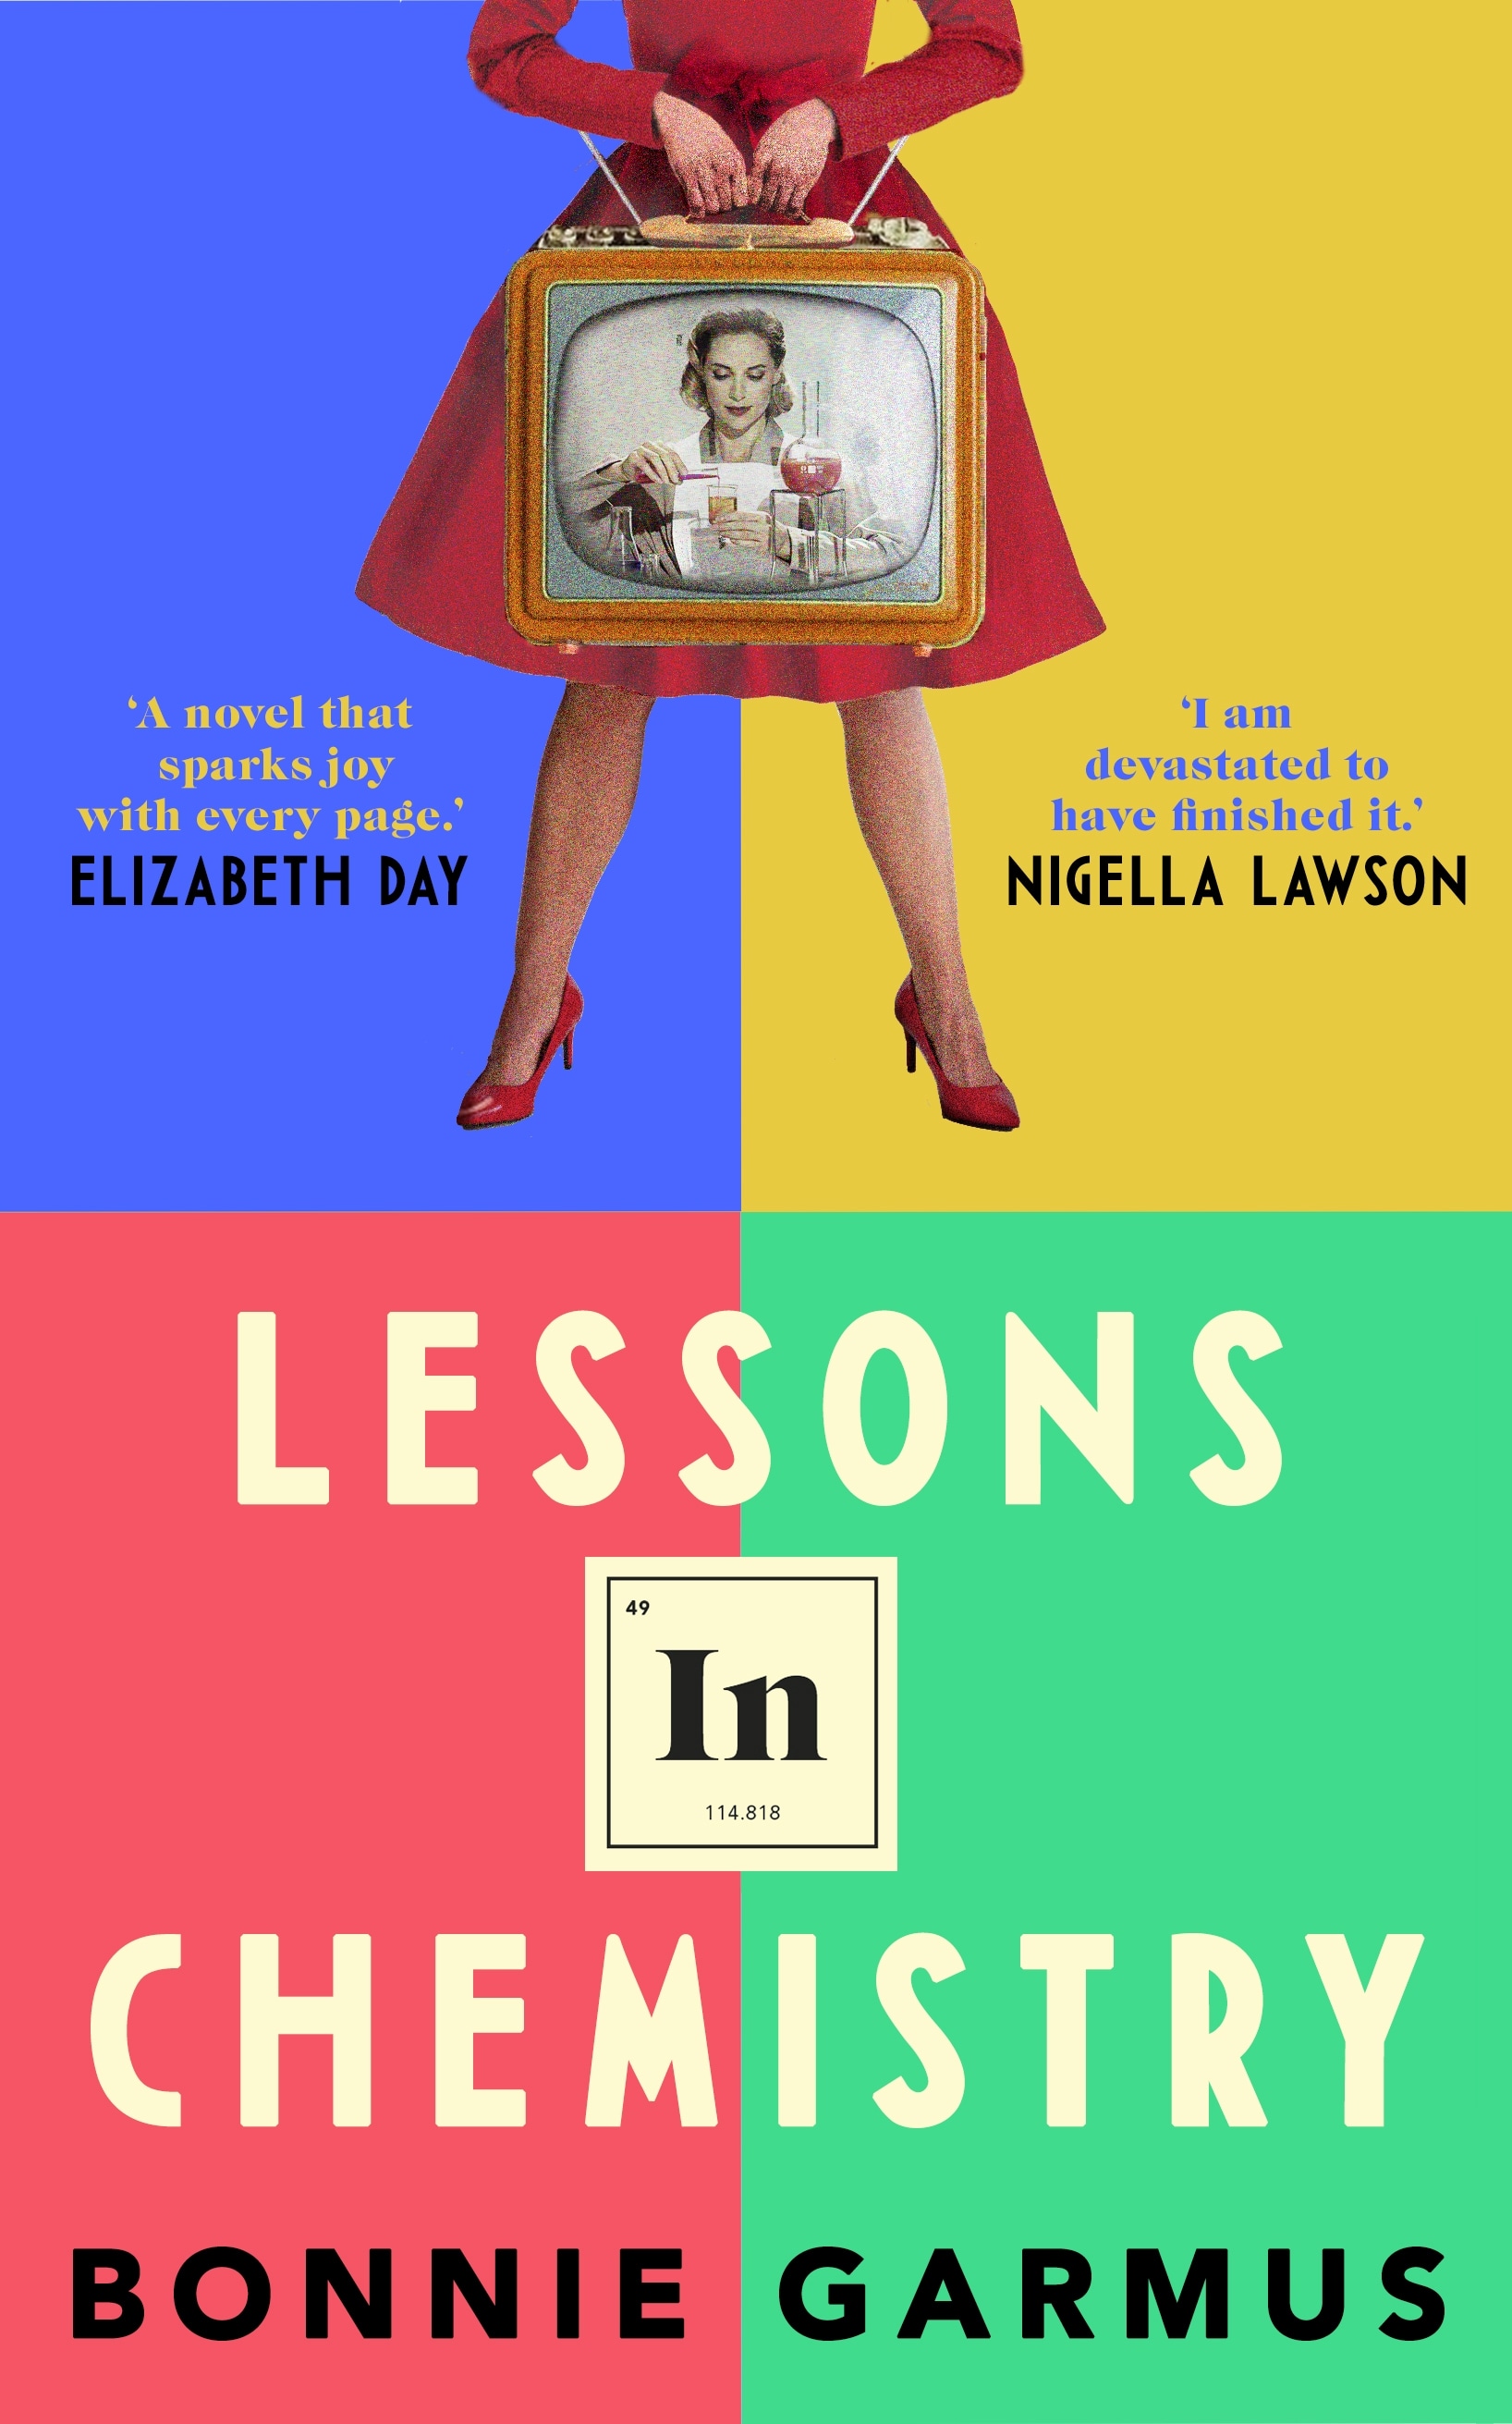 Book “Lessons in Chemistry” by Bonnie Garmus — April 5, 2022